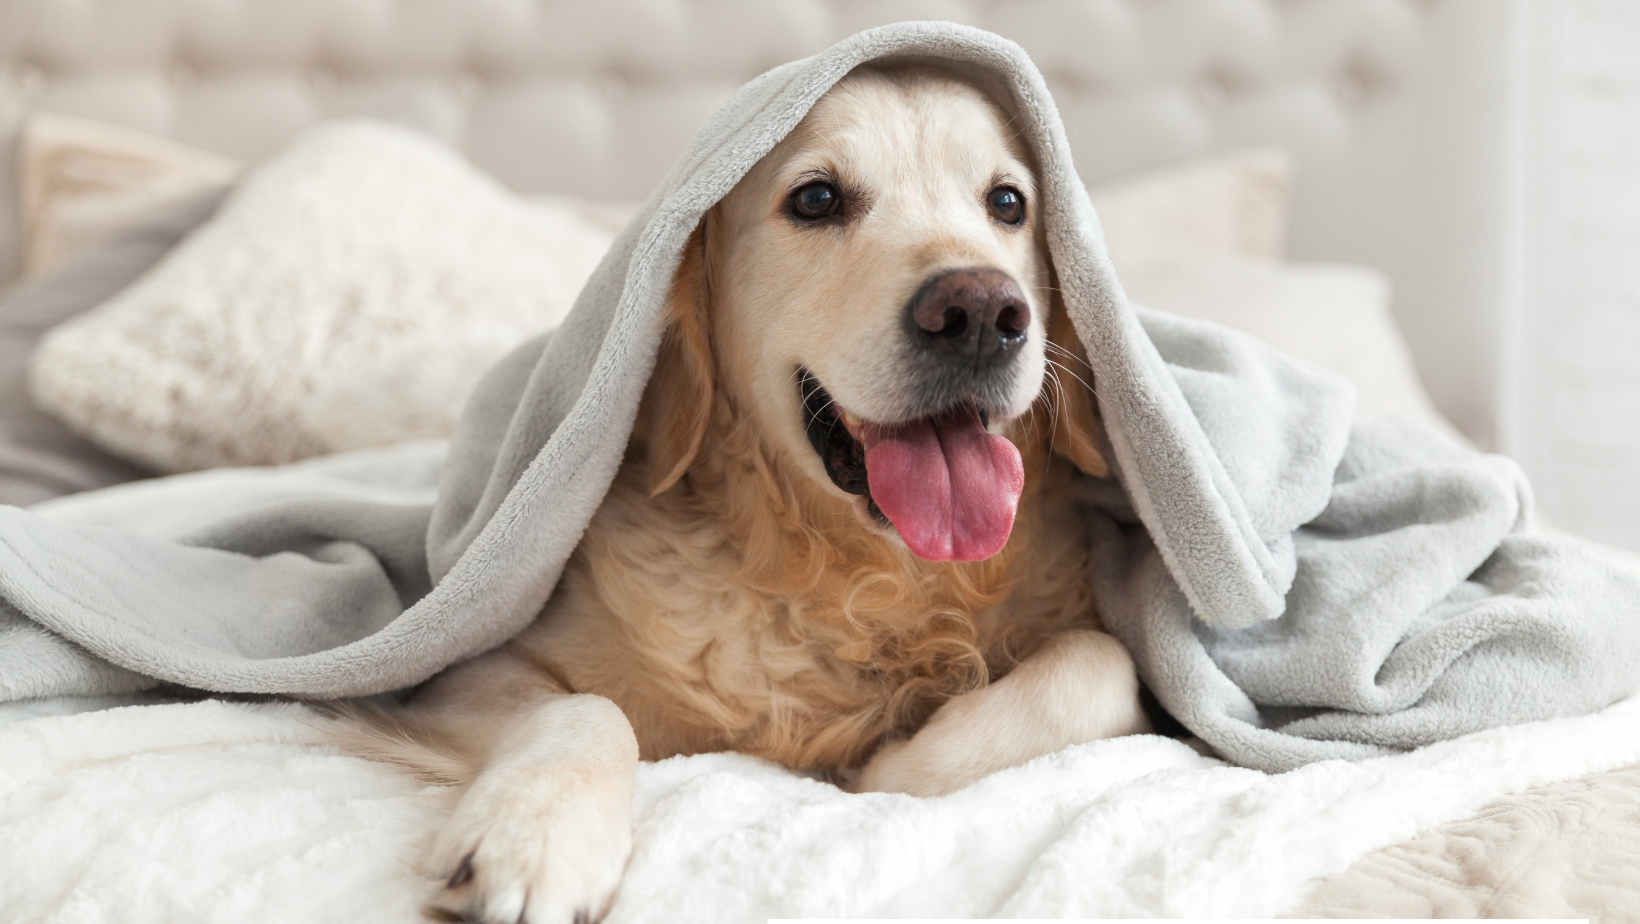 When Should I be Concerned About My Pet's Blanket Nibbling?